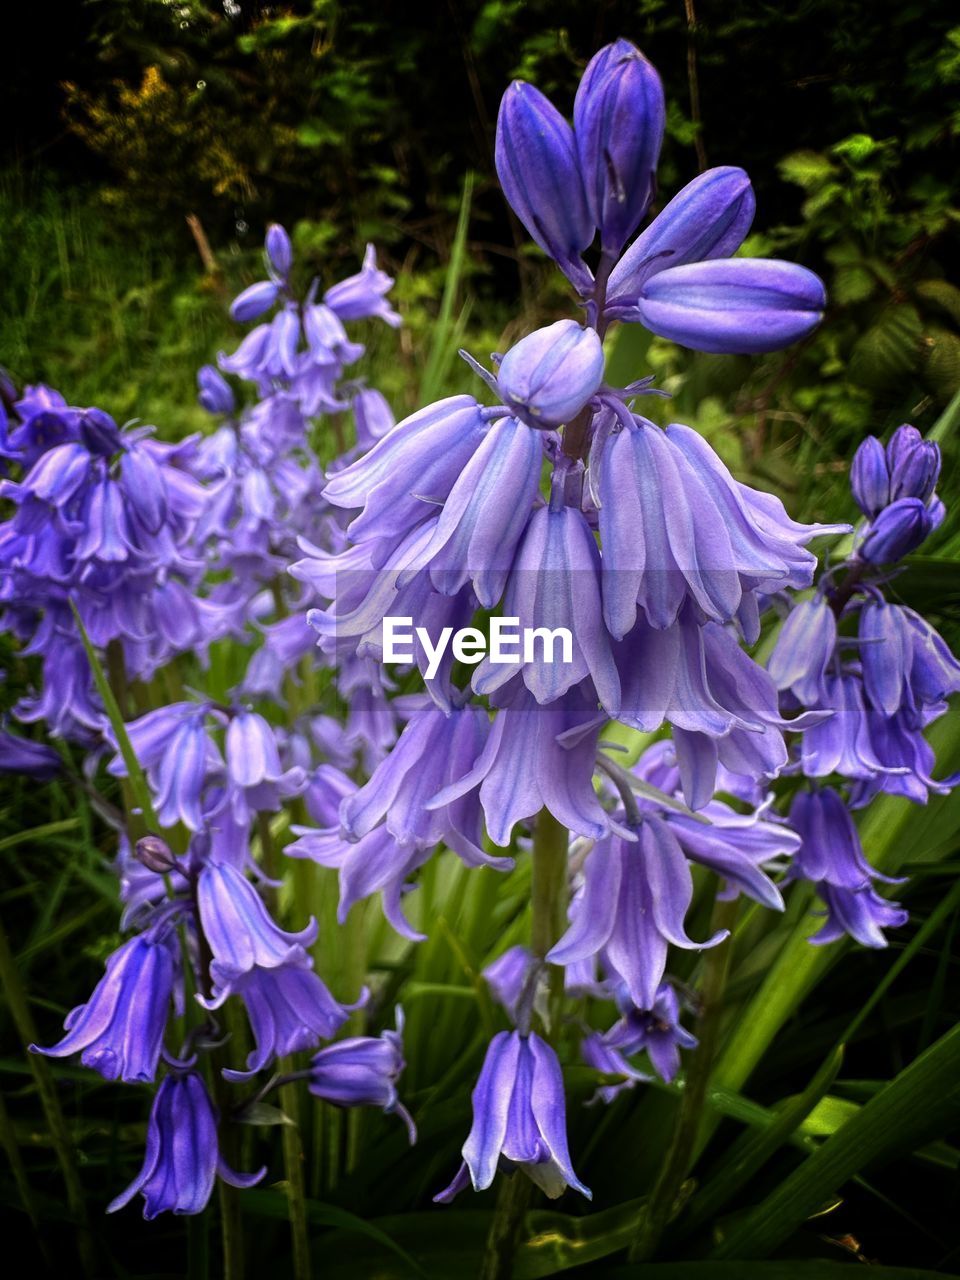 flower, plant, flowering plant, beauty in nature, freshness, purple, fragility, growth, close-up, petal, nature, inflorescence, flower head, no people, blossom, botany, springtime, focus on foreground, day, outdoors, wildflower